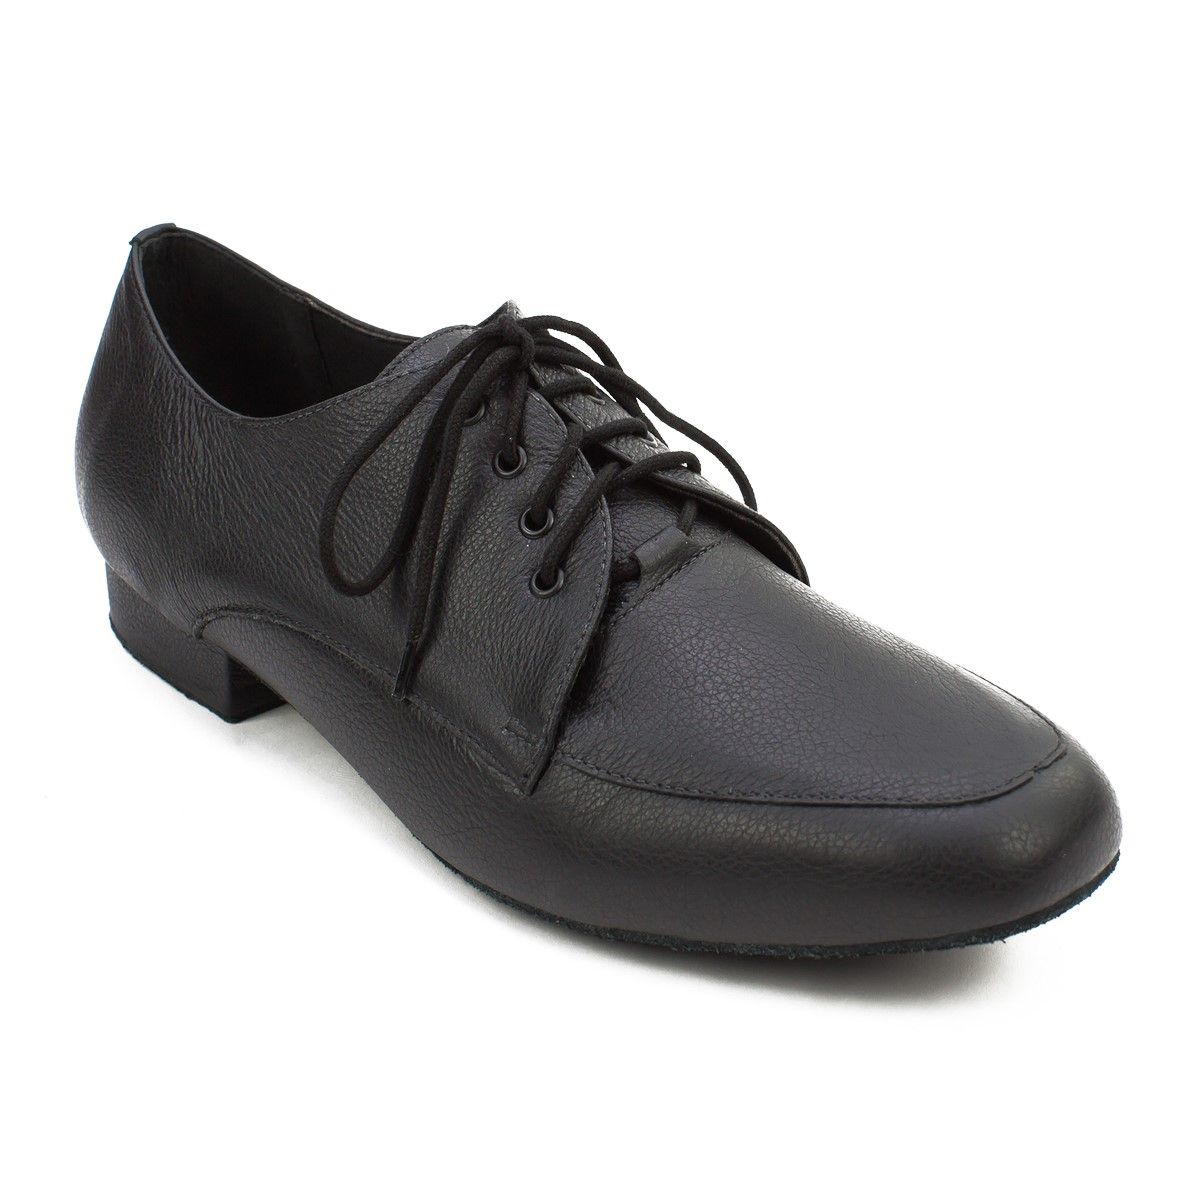 Men's Laced Up Leather Dance Shoe with Suede Soles